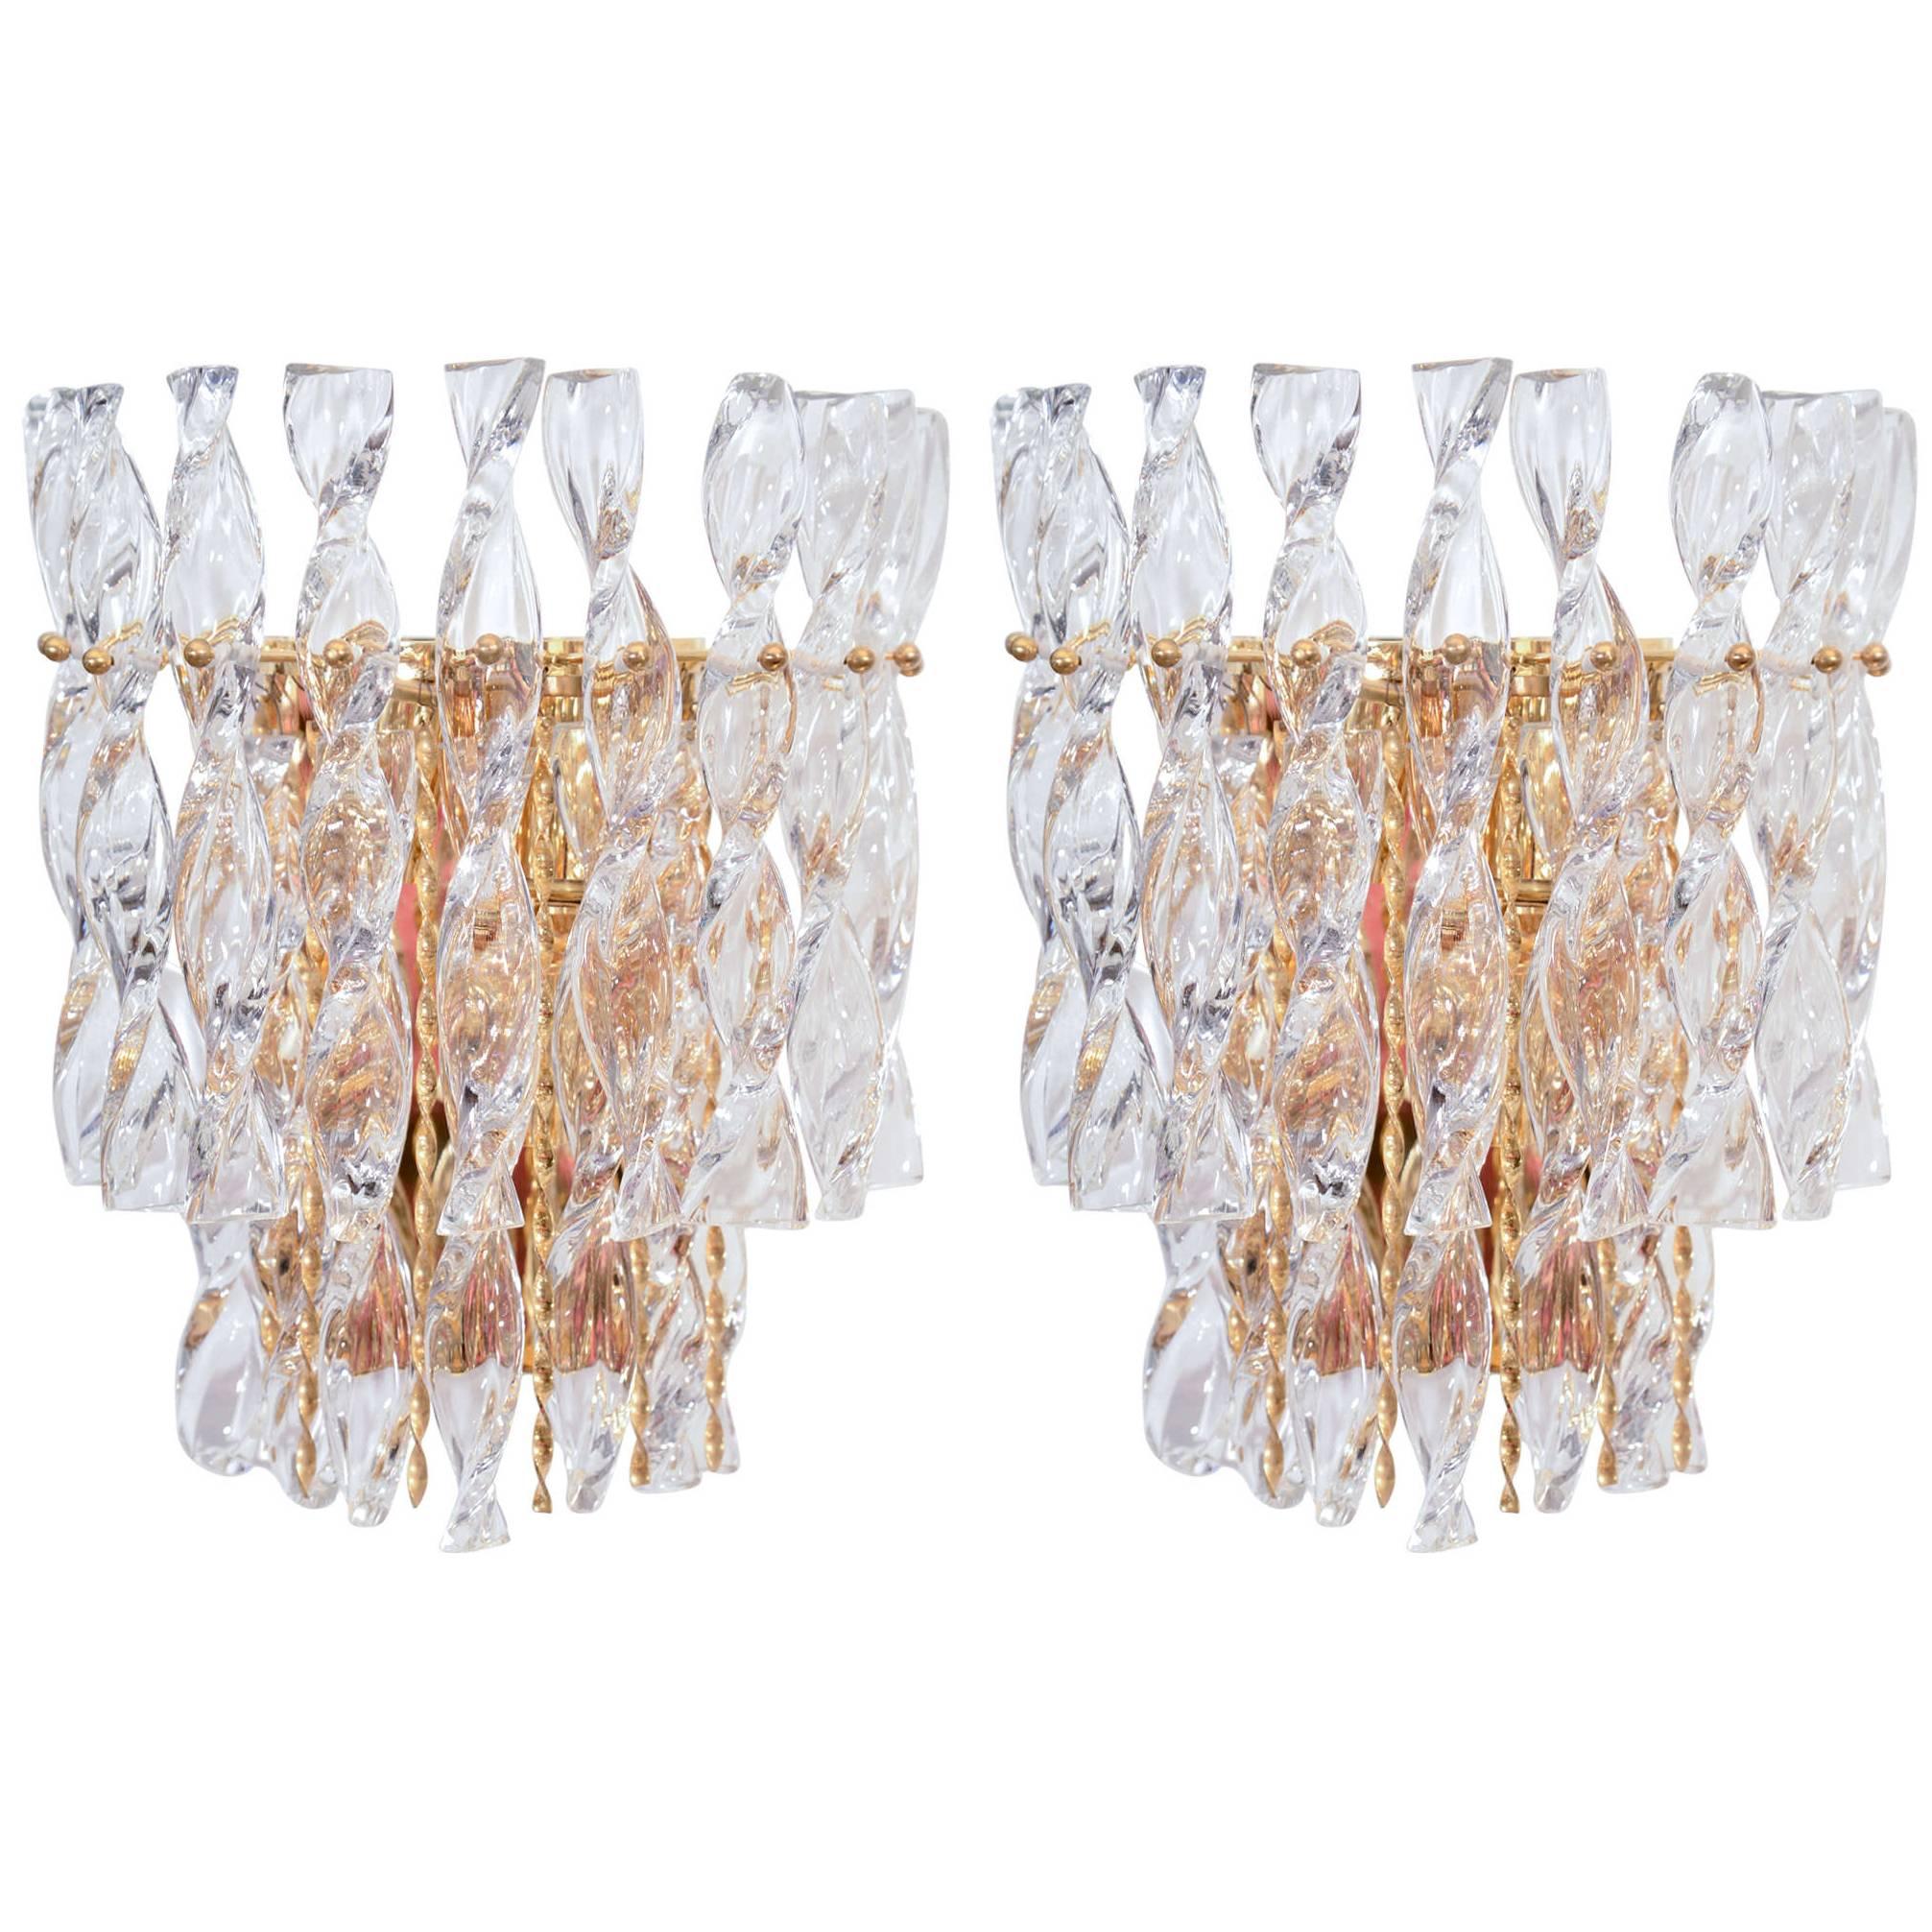 Pair of Two-Tier Spiral Crystal Sconce by Palwa